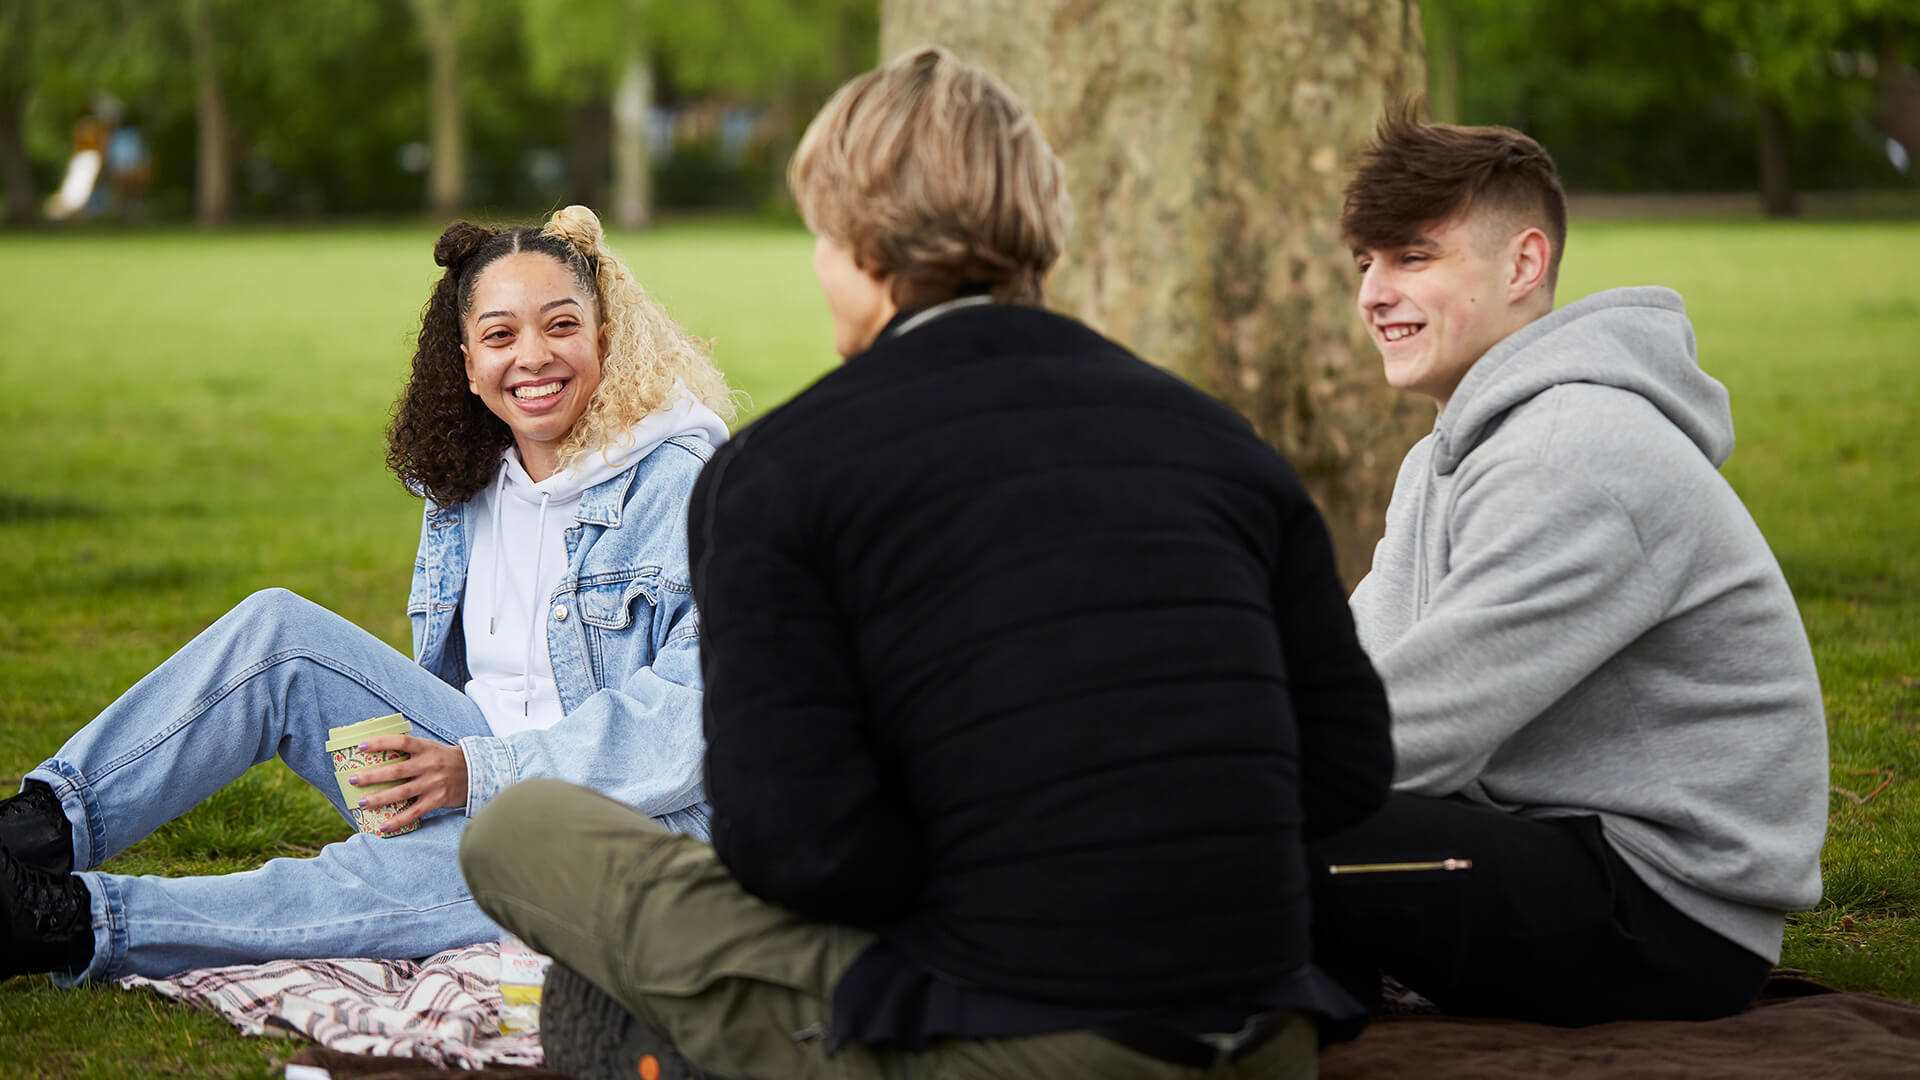 A group of three young people laugh and chat while sitting on the ground beside a tree in the park.